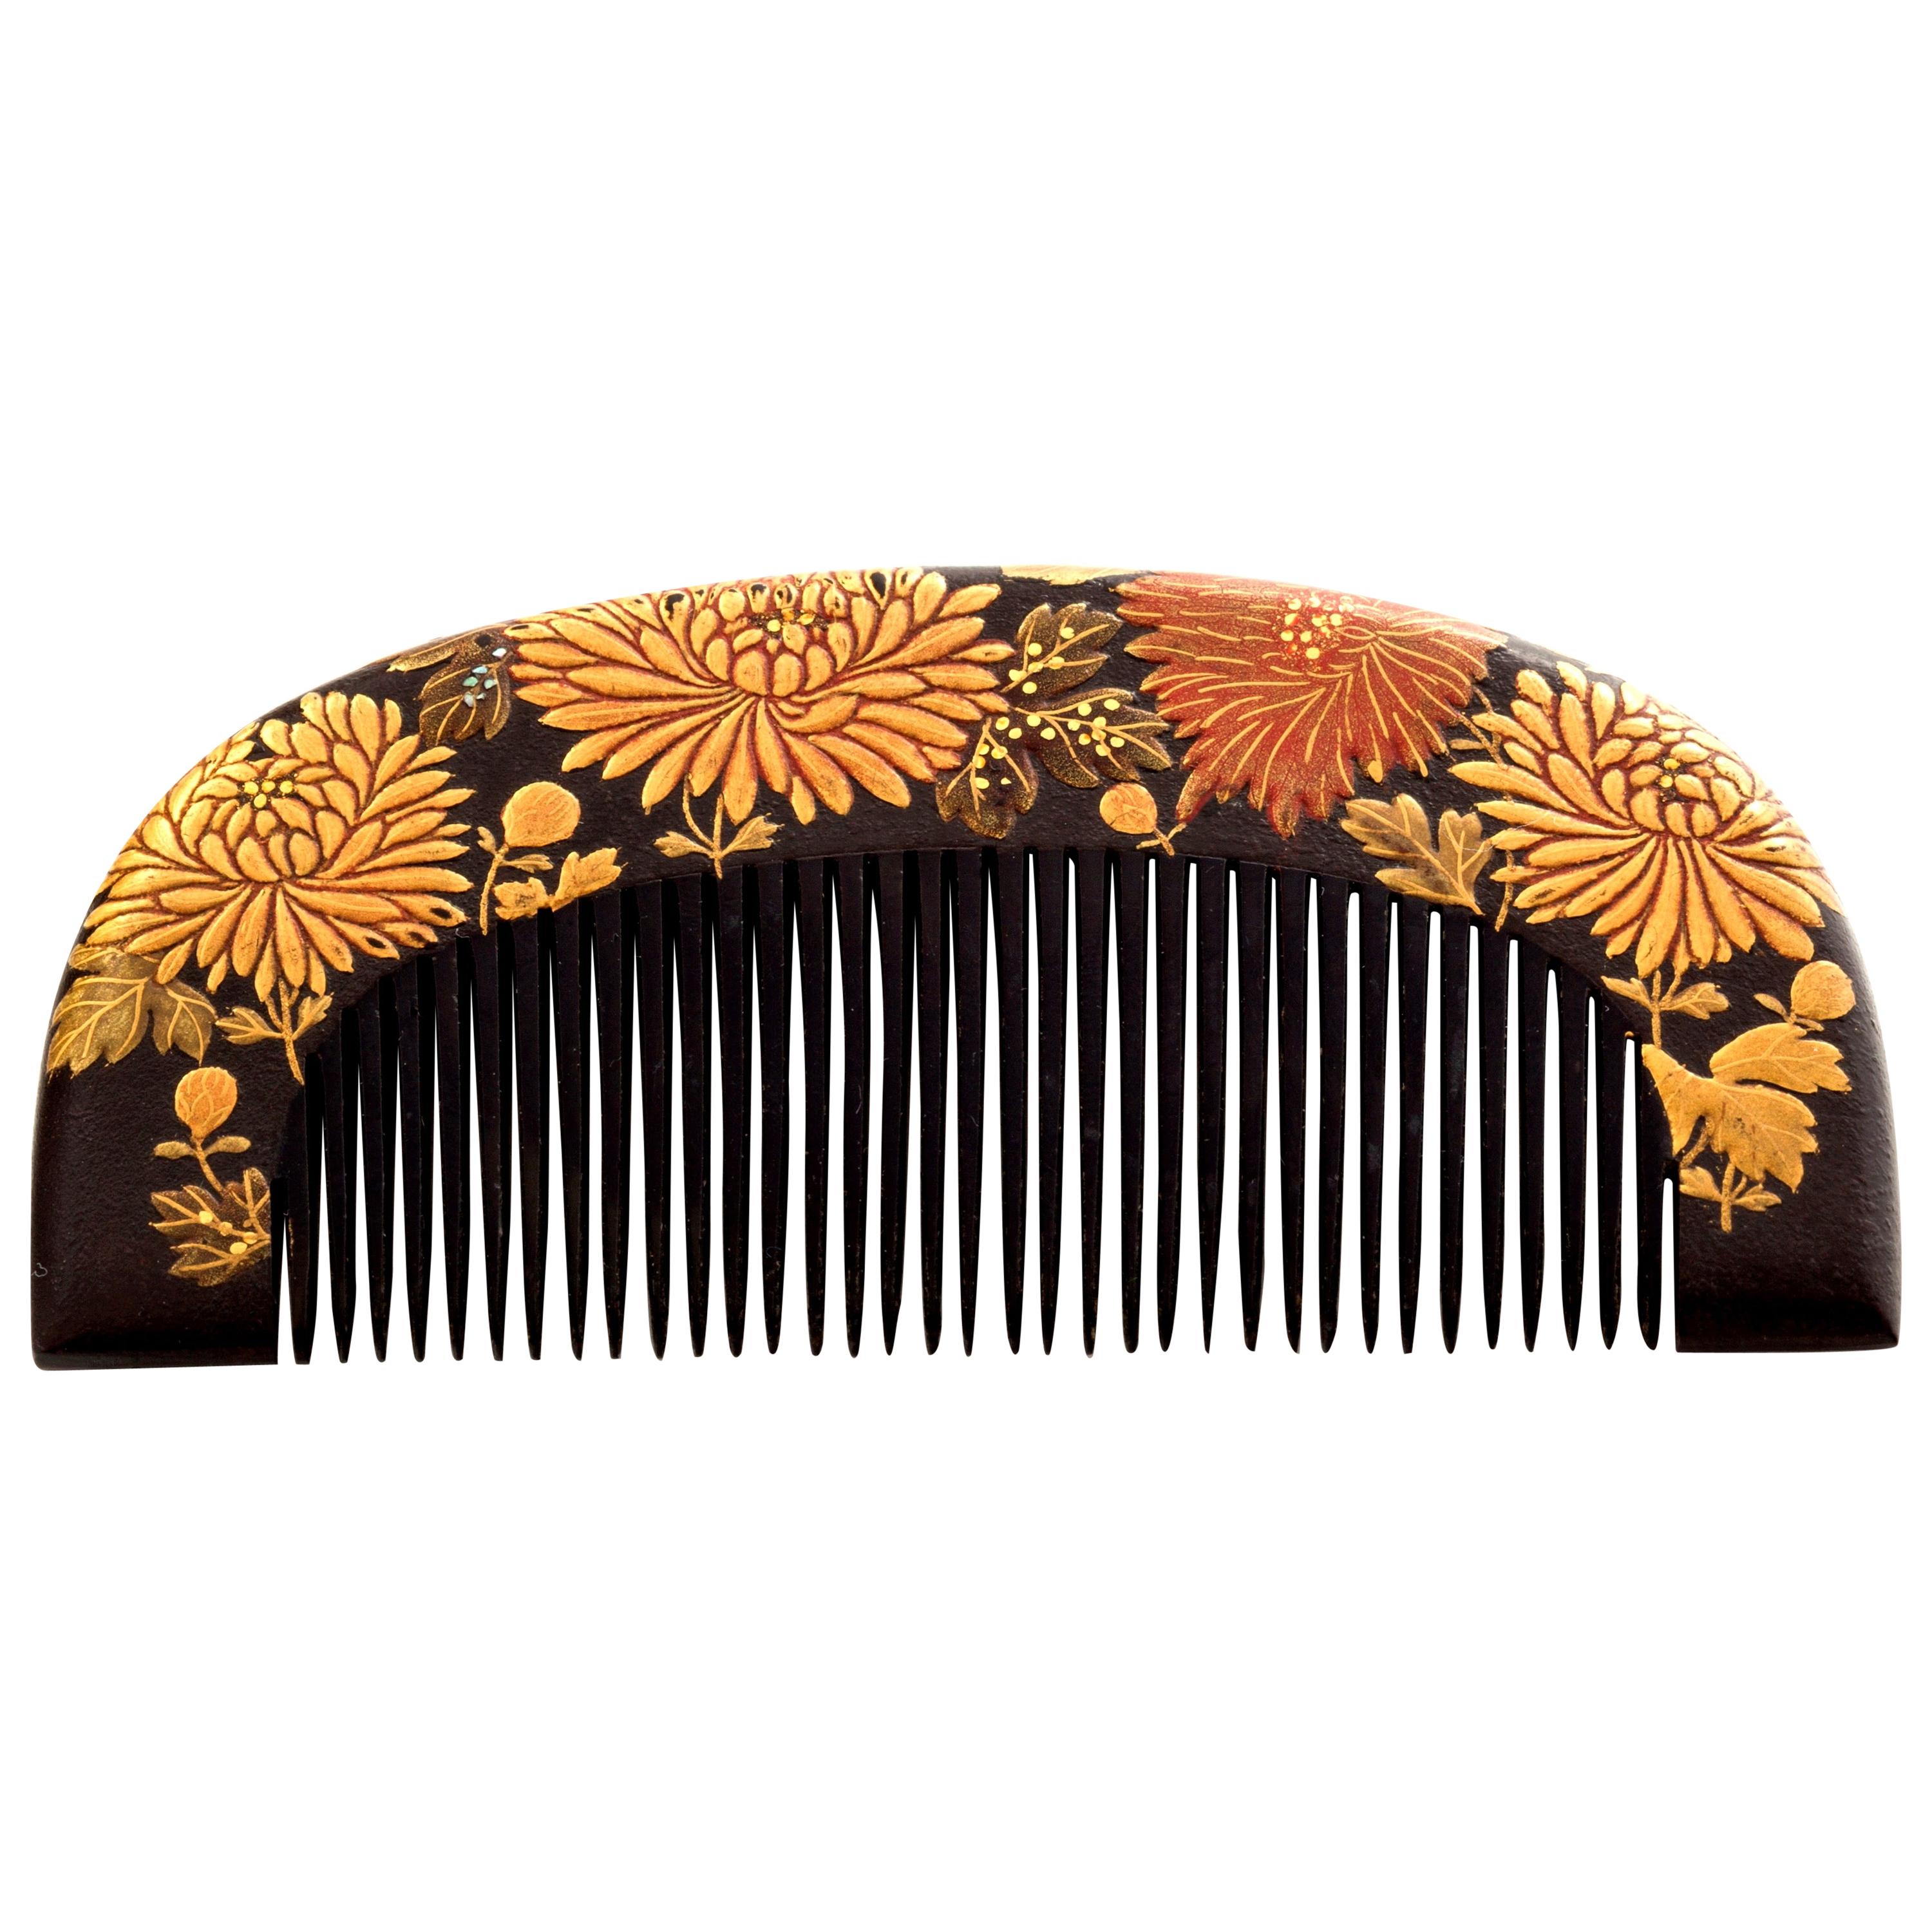 Japanese Antique Lacquer Hair Comb with Flowers in Gold Maki-e